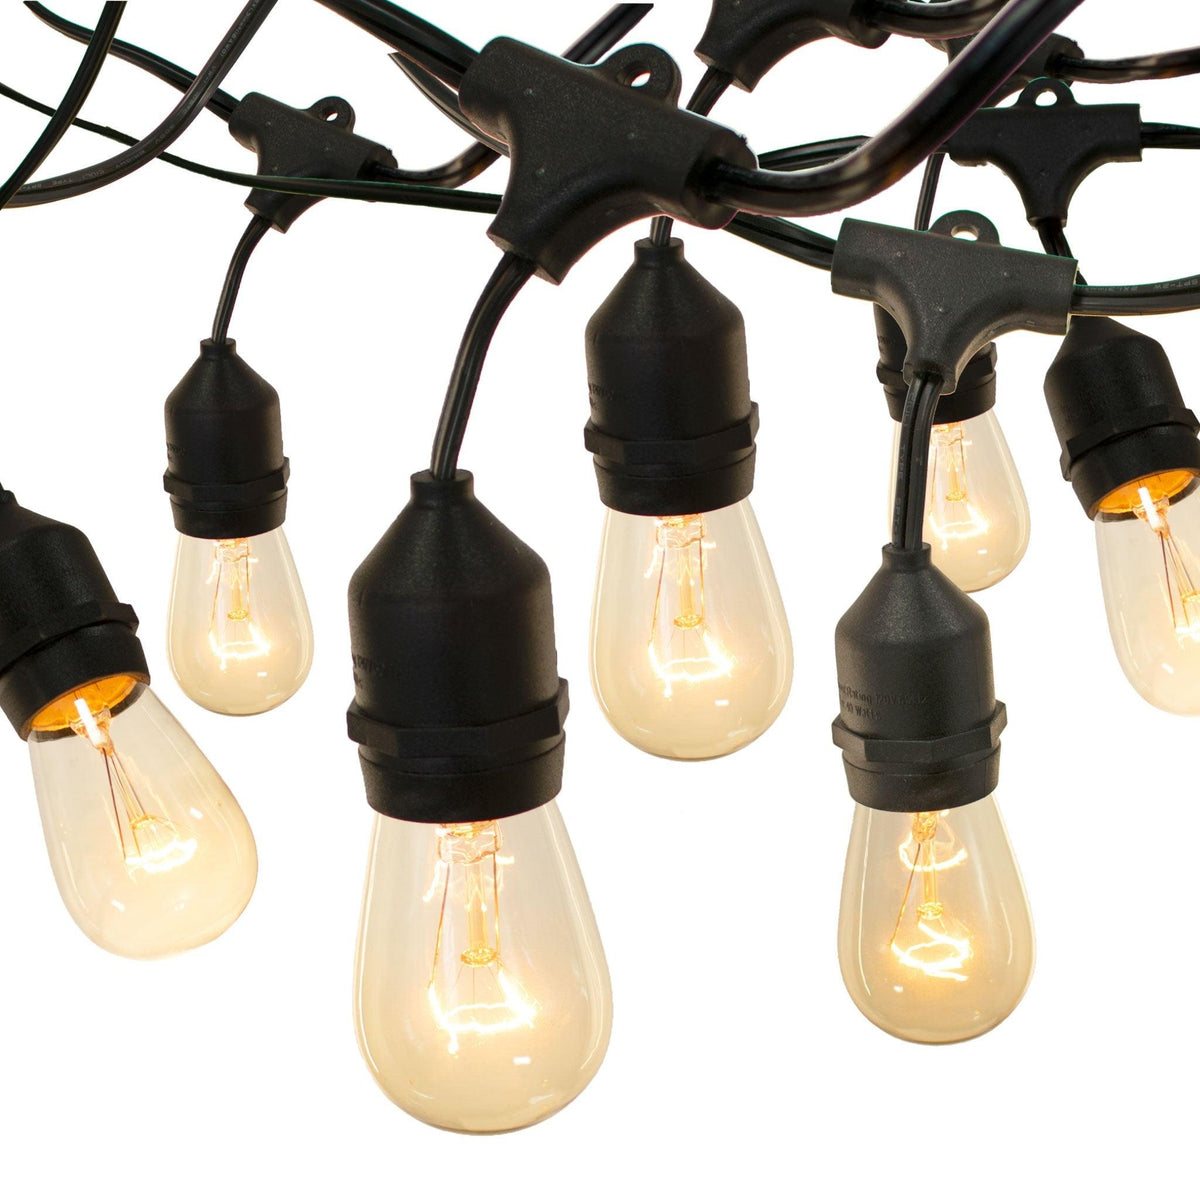 Shop for your brand new Vintage Patio Hanging Cord Lights now at leedisplay.com